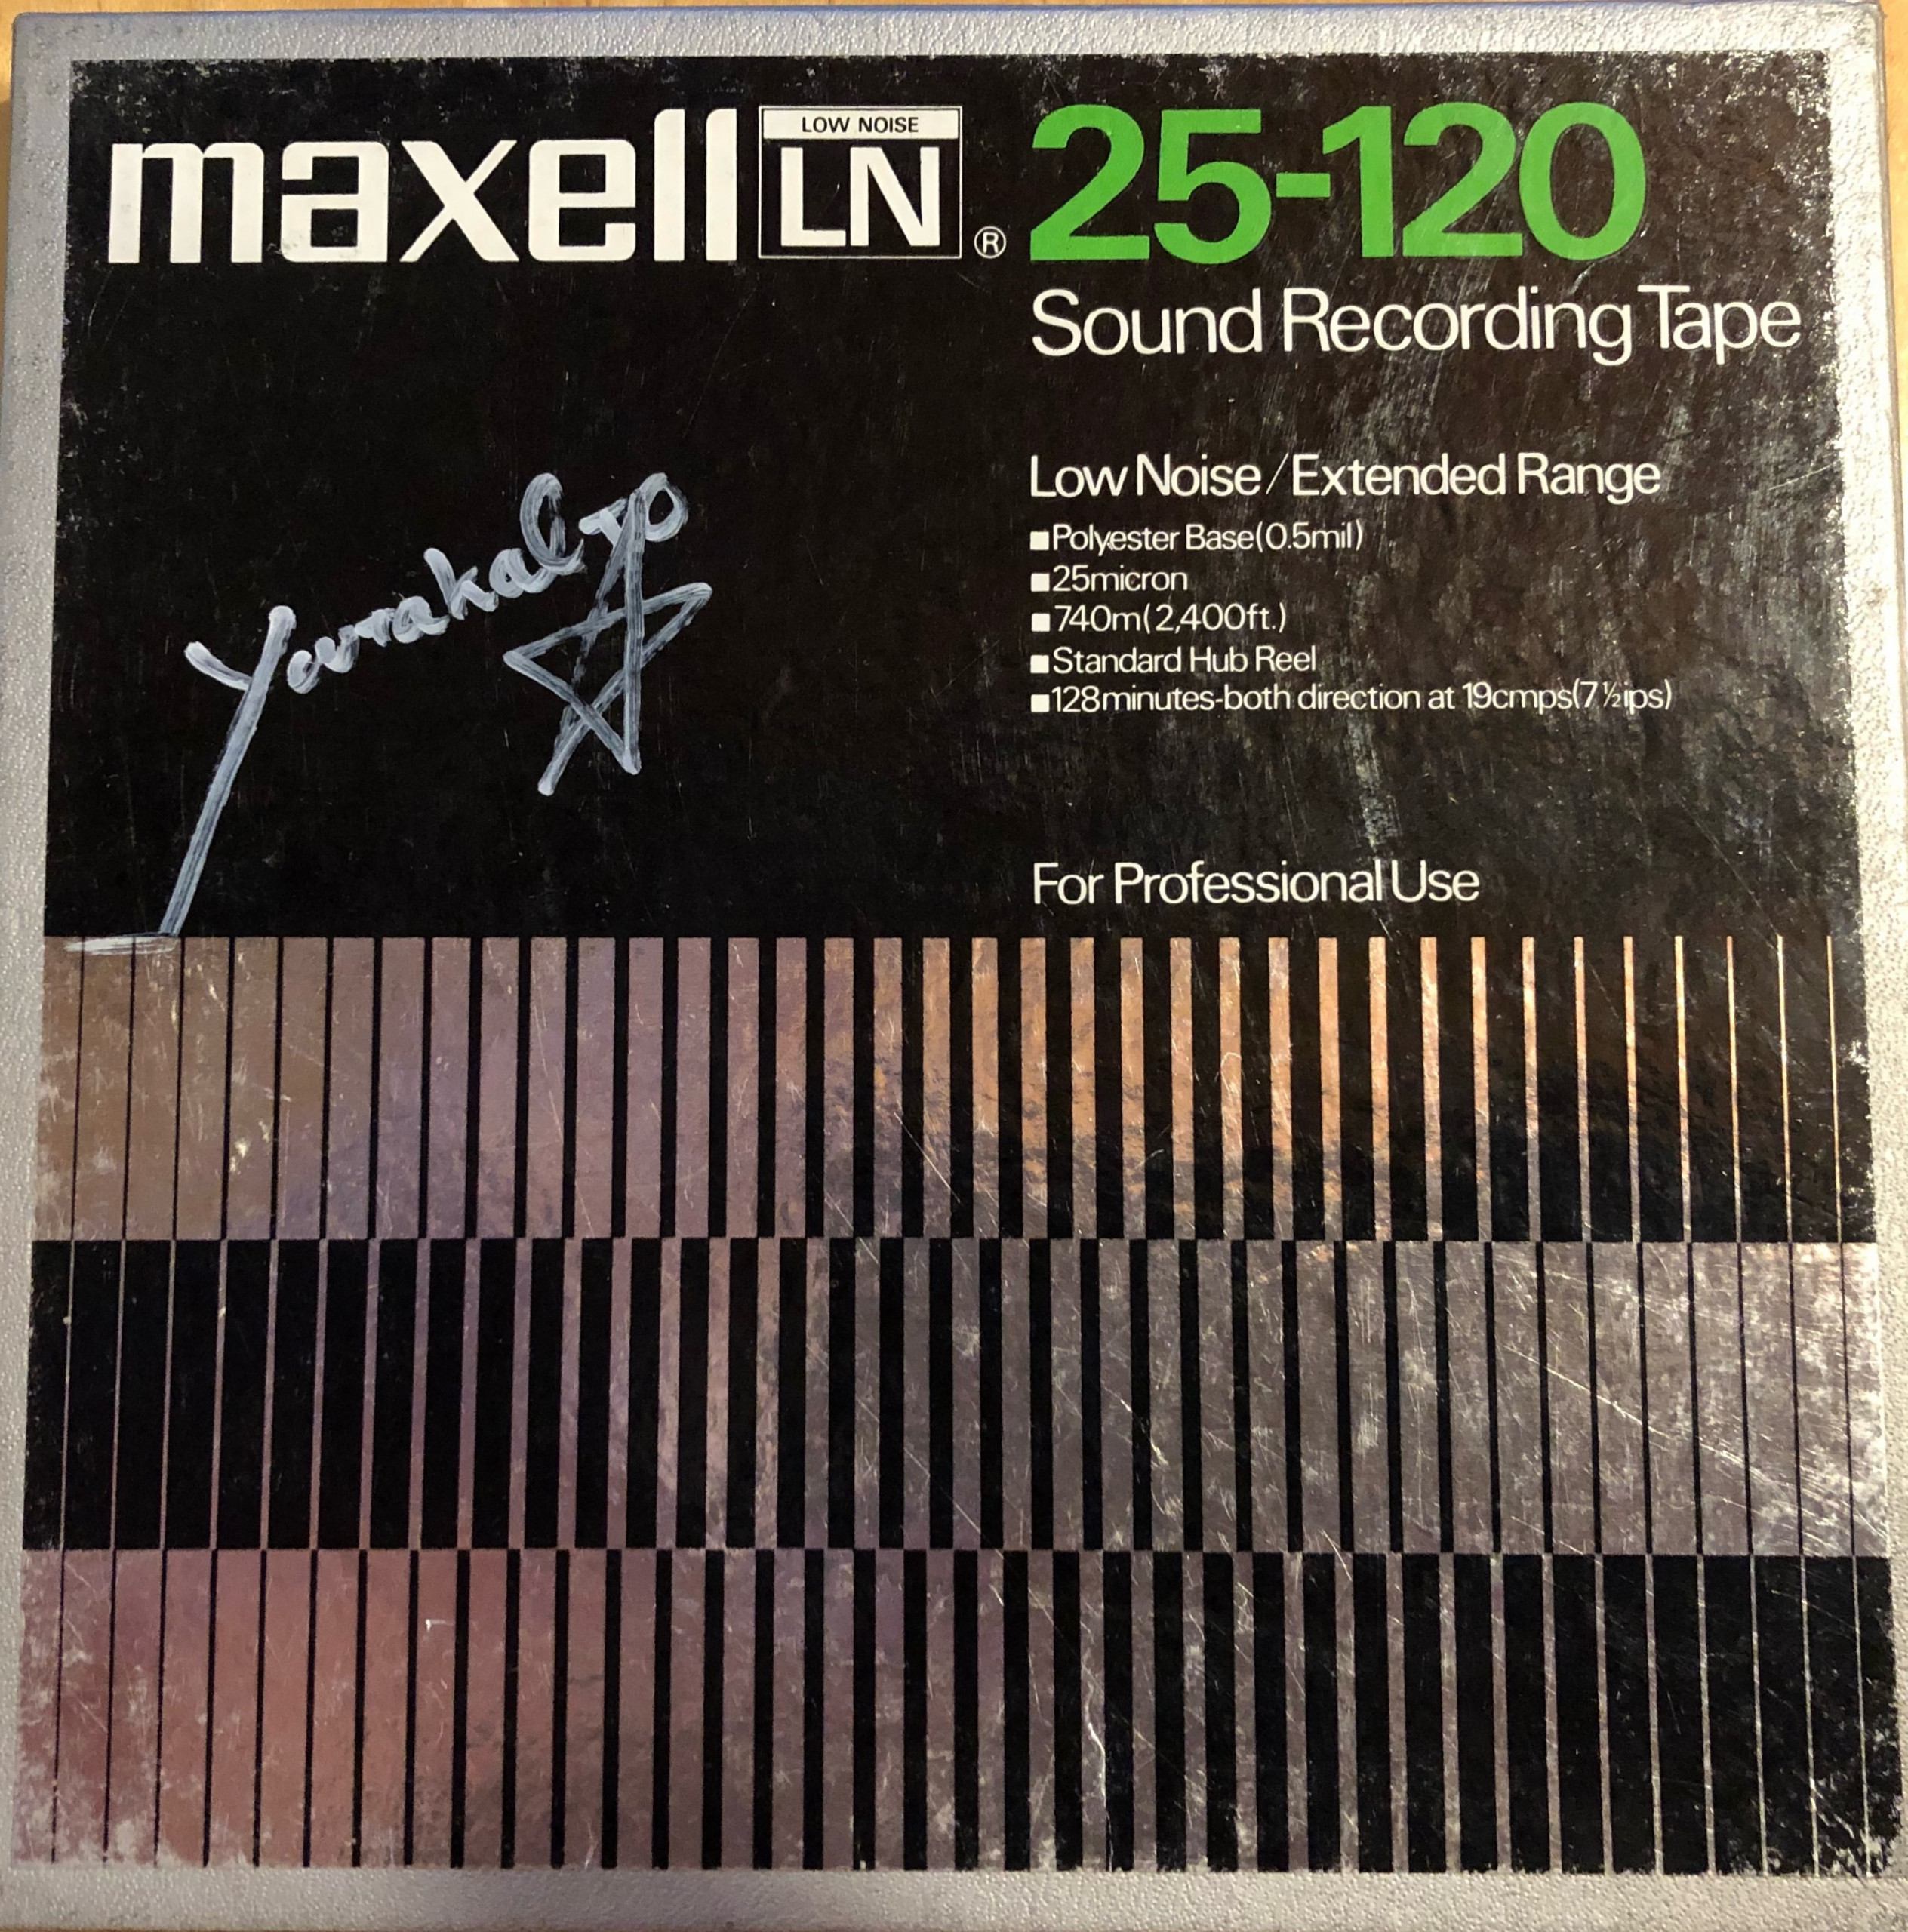 Maxell UD Late Gen Reel to Reel Recording Tape, LP, 7″ Reel, 1800 ft